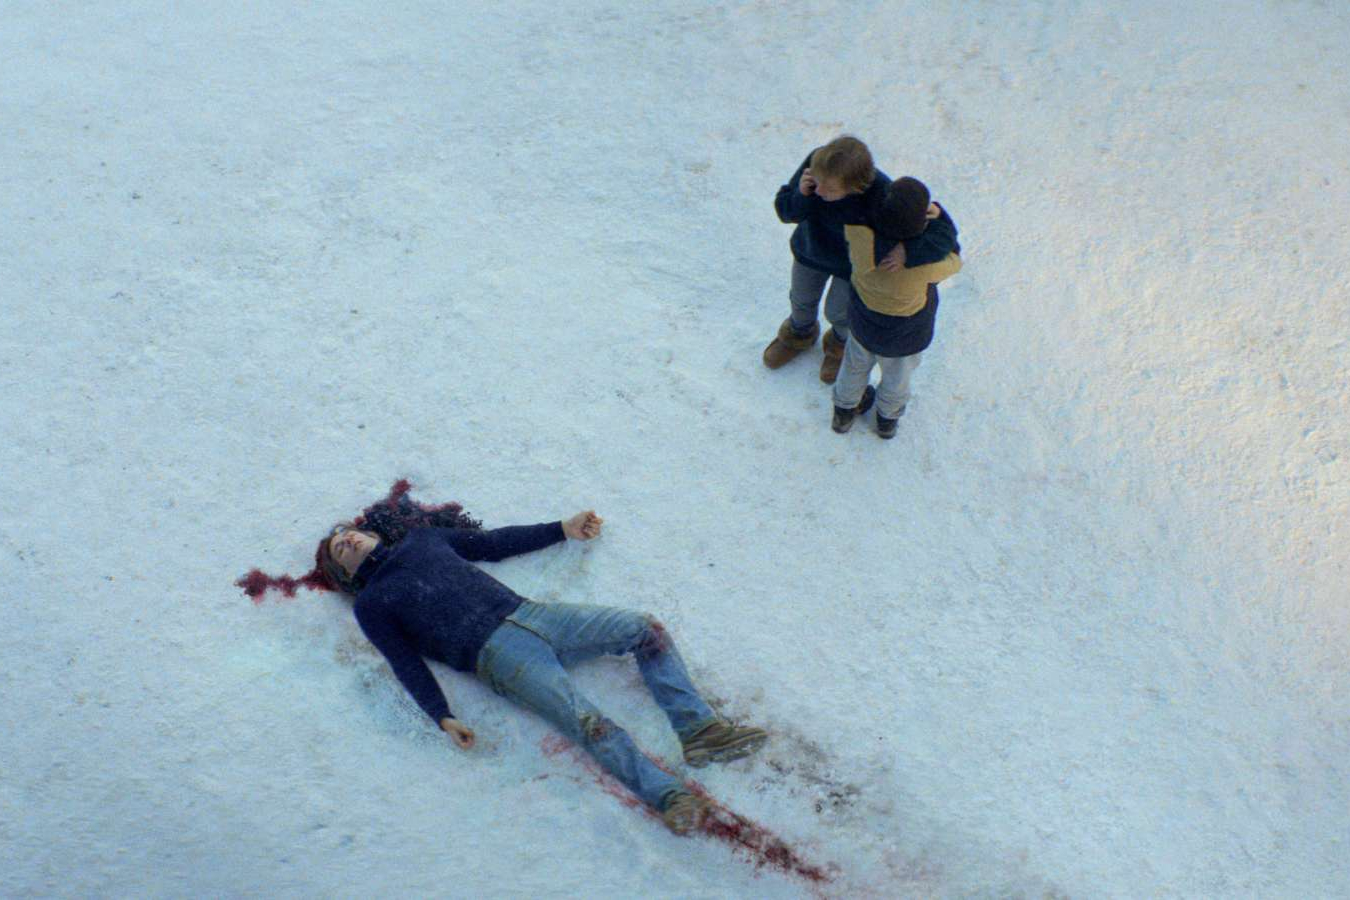 A woman and boy stare at a dead man in the snow.